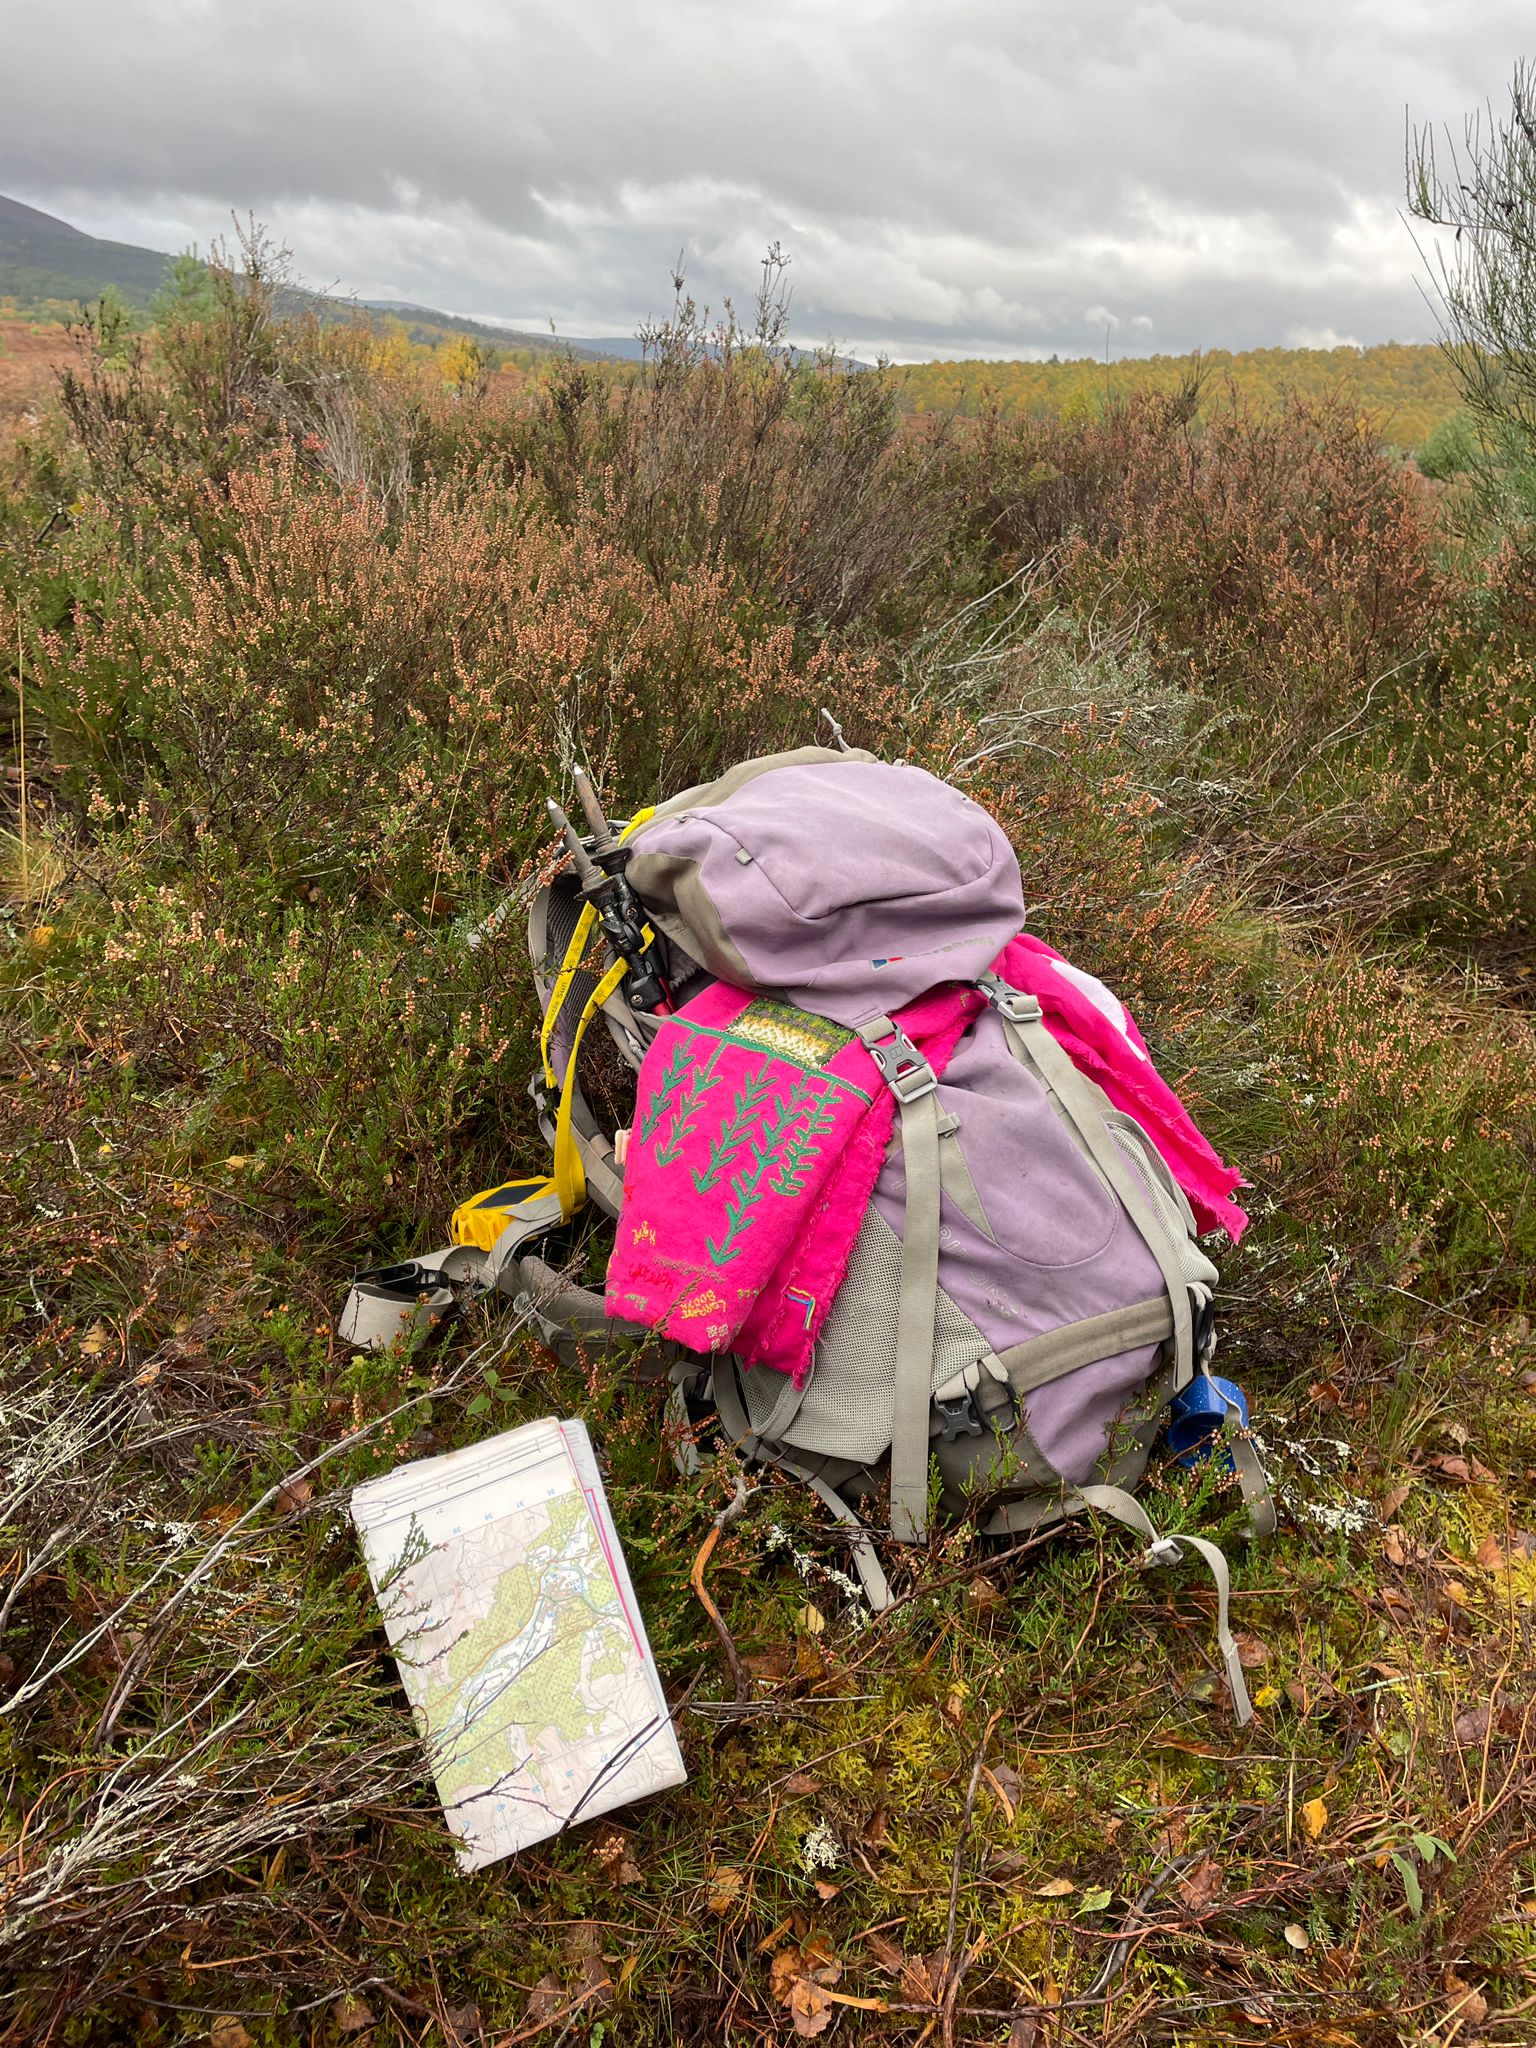 Rucksack with embroidered pink tablecloth tucked into it, with map on ground at the side surrounded by heather